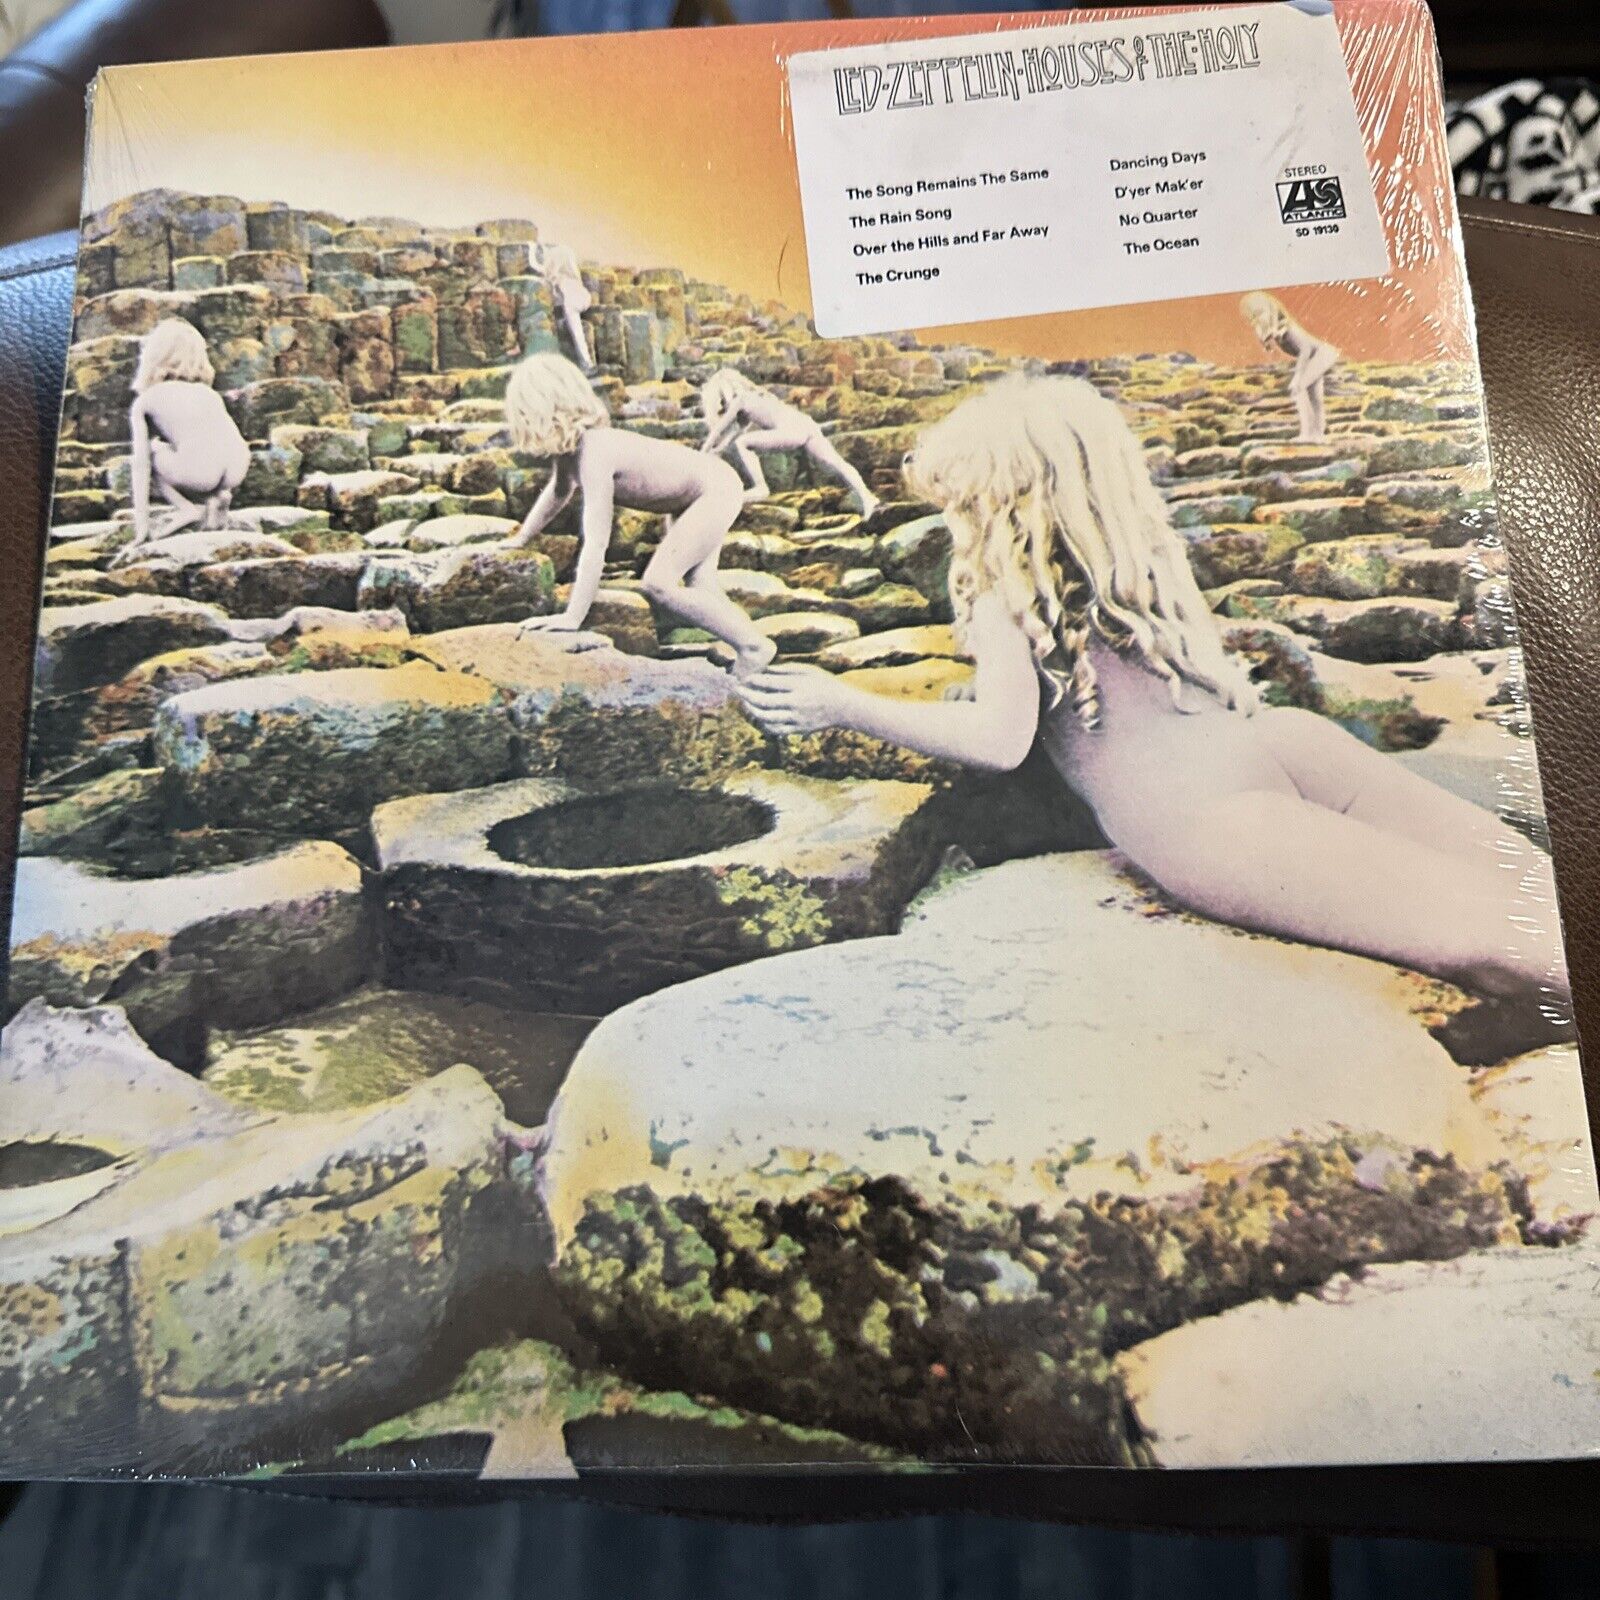 1977 - Led Zepplin - “Houses of the Holy” - Sealed with Hype Sticker.